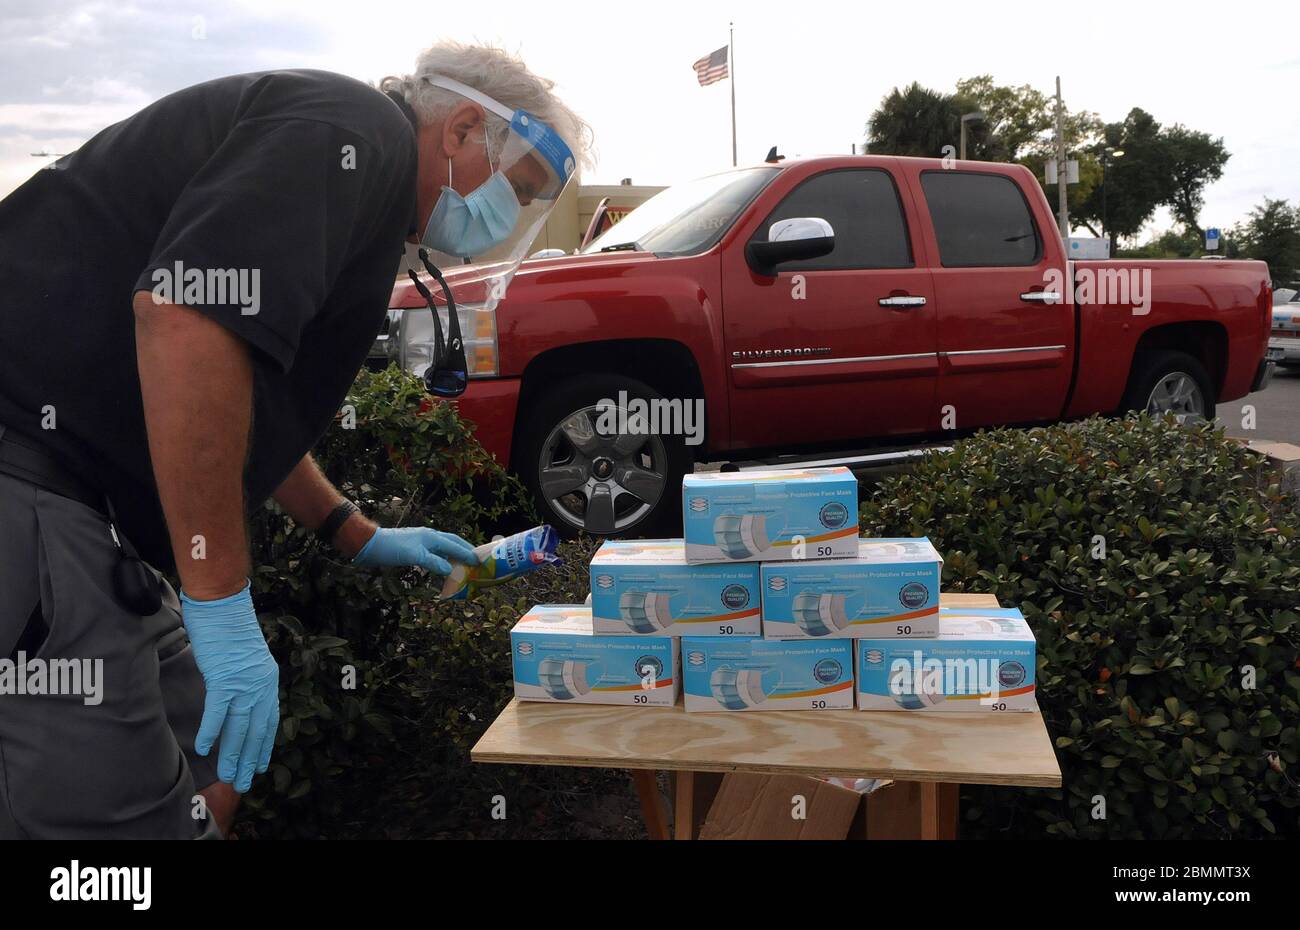 Orlando, United States. 09th May, 2020. Pete Crotty displays his merchandise on a small table at a roadside stand where he sells protective face masks during the Coronavirus (COVID-19) crisis.Crotty sold sunscreen to hotels and resorts in the Orlando area until they were forced to close due to the pandemic. Credit: SOPA Images Limited/Alamy Live News Stock Photo